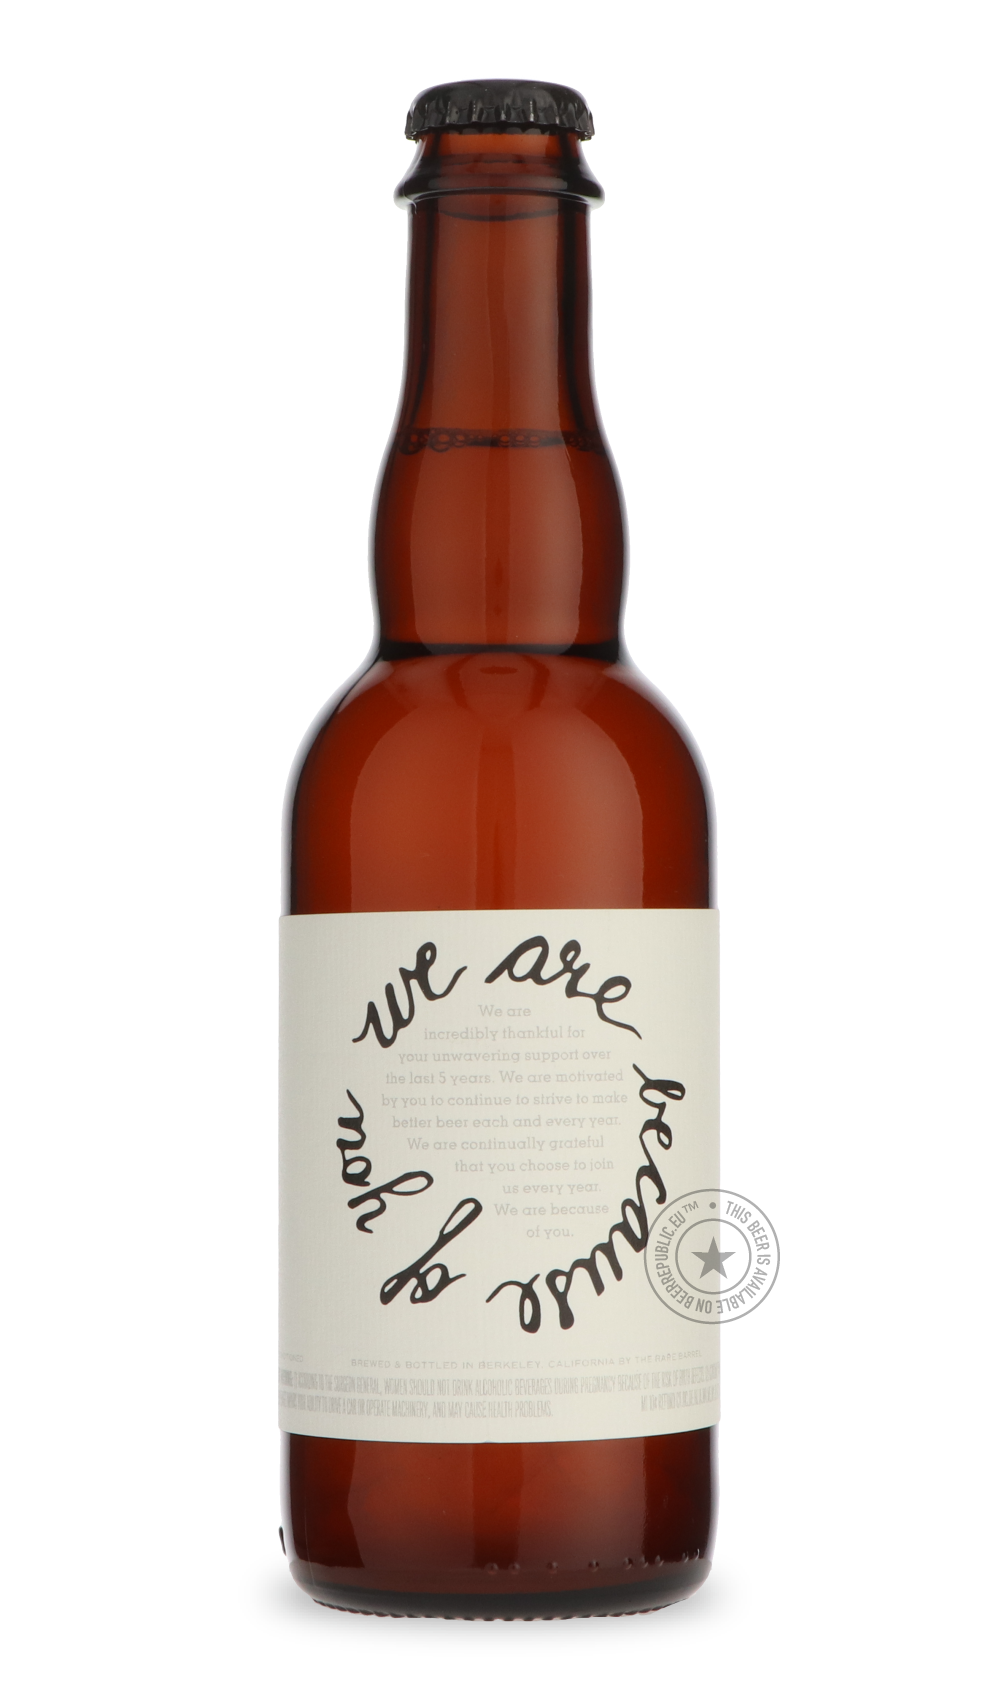 -The Rare Barrel- We Are Because of You 2020-Sour / Wild & Fruity- Only @ Beer Republic - The best online beer store for American & Canadian craft beer - Buy beer online from the USA and Canada - Bier online kopen - Amerikaans bier kopen - Craft beer store - Craft beer kopen - Amerikanisch bier kaufen - Bier online kaufen - Acheter biere online - IPA - Stout - Porter - New England IPA - Hazy IPA - Imperial Stout - Barrel Aged - Barrel Aged Imperial Stout - Brown - Dark beer - Blond - Blonde - Pilsner - Lage